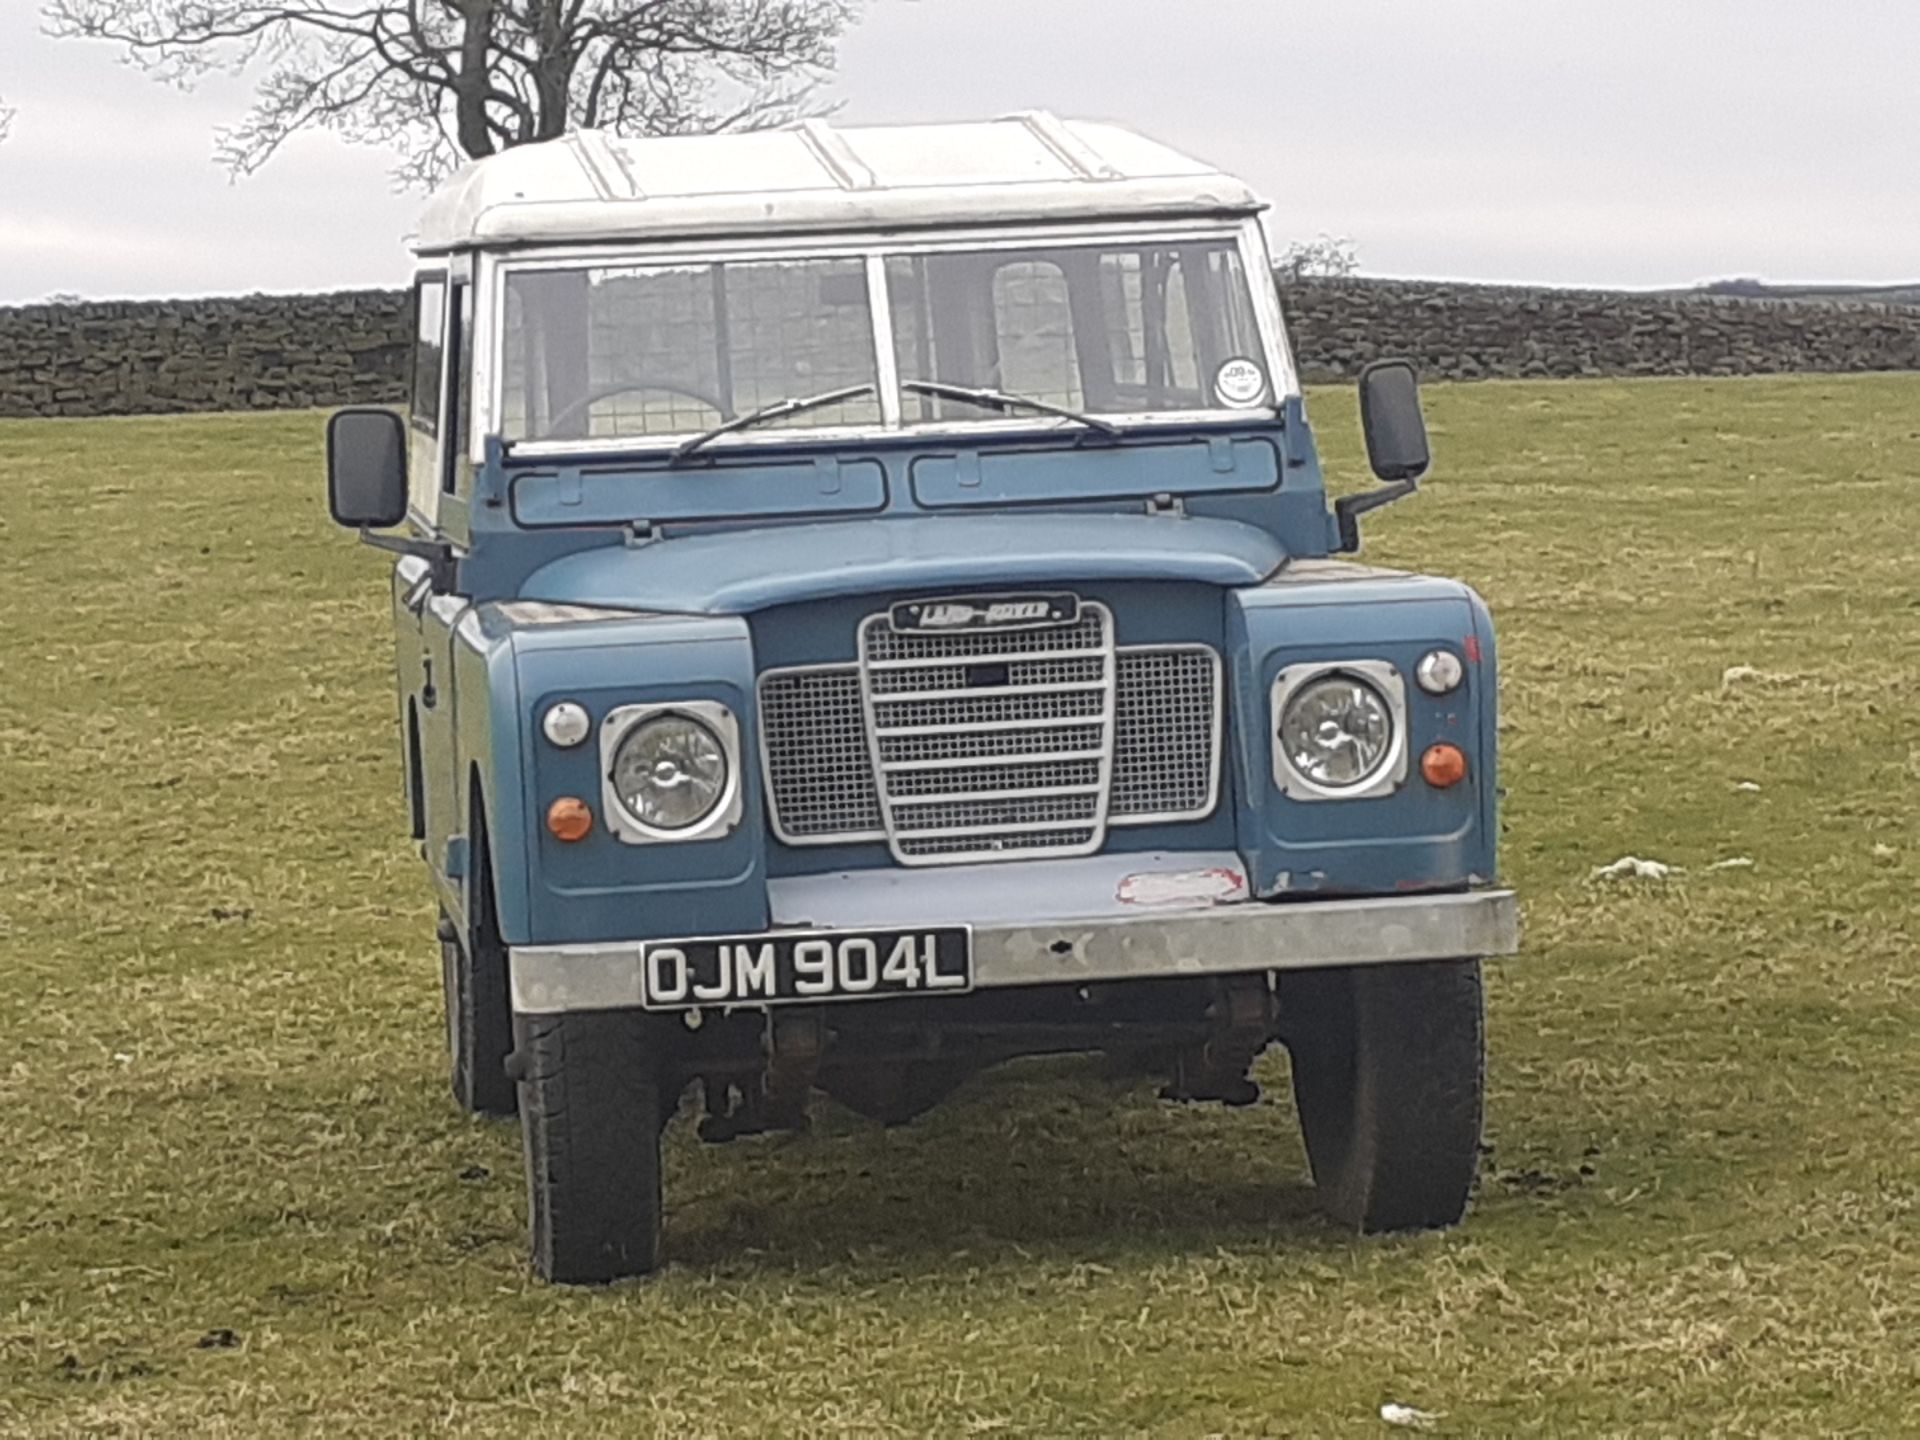 1972 LAND ROVER 88" - 4 CYL 2.5 DIESEL NATURALLY ASPIRATED, DRIVES AS IT SHOULD, WONDERFUL PATINA - Image 3 of 15